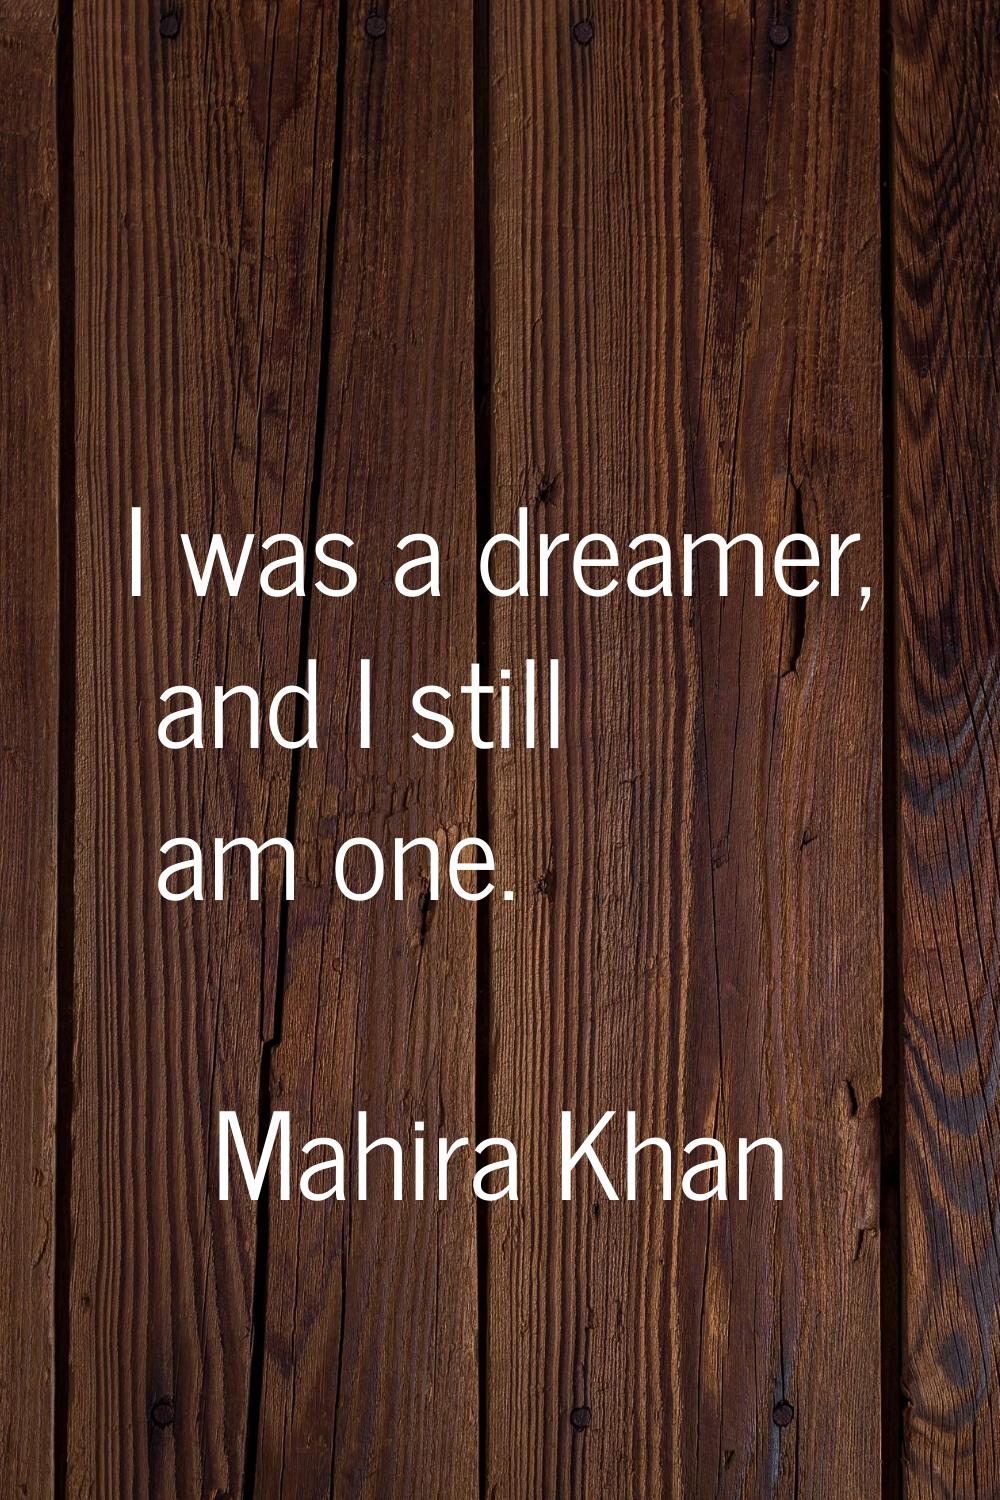 I was a dreamer, and I still am one.